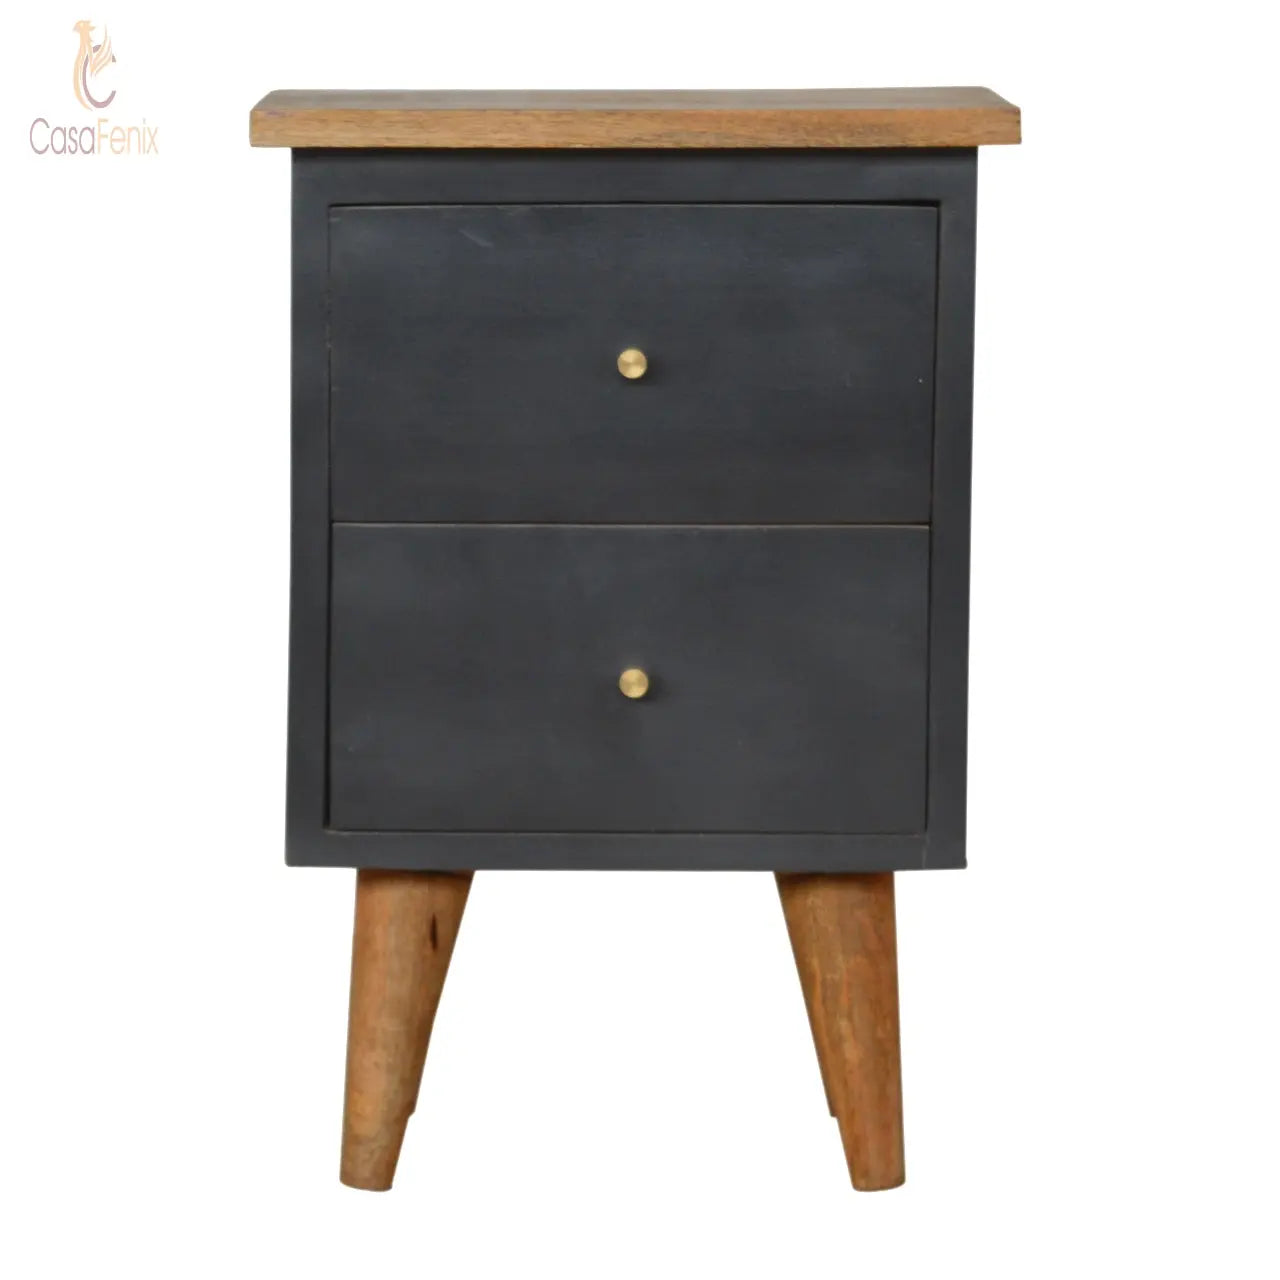 Charcoal Black Hand Painted Bedside Table 2 Drawer Solid Wood Chest - CasaFenix